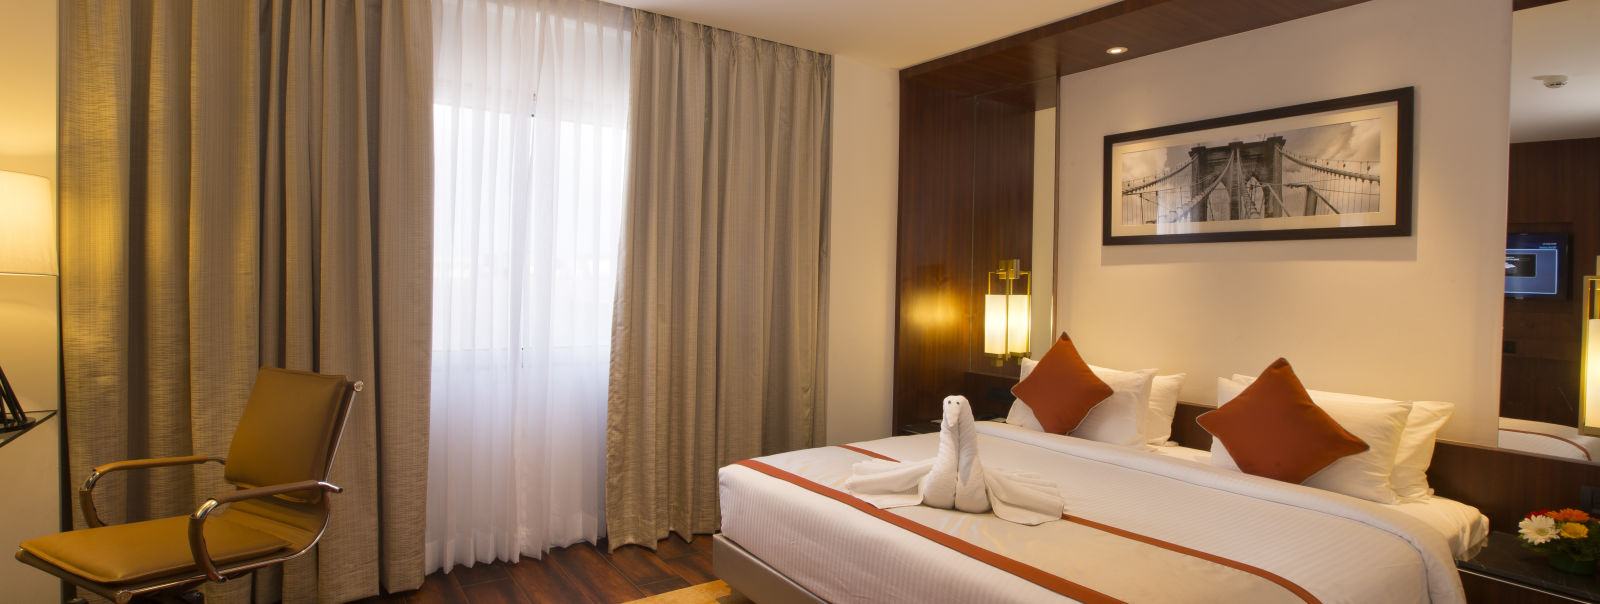 Another view of a hotel room with a large bed with white and orange linens, a brown office chair and sheer curtains over a window - Hotel Southend by TGI - Bommasandra, Bangalore